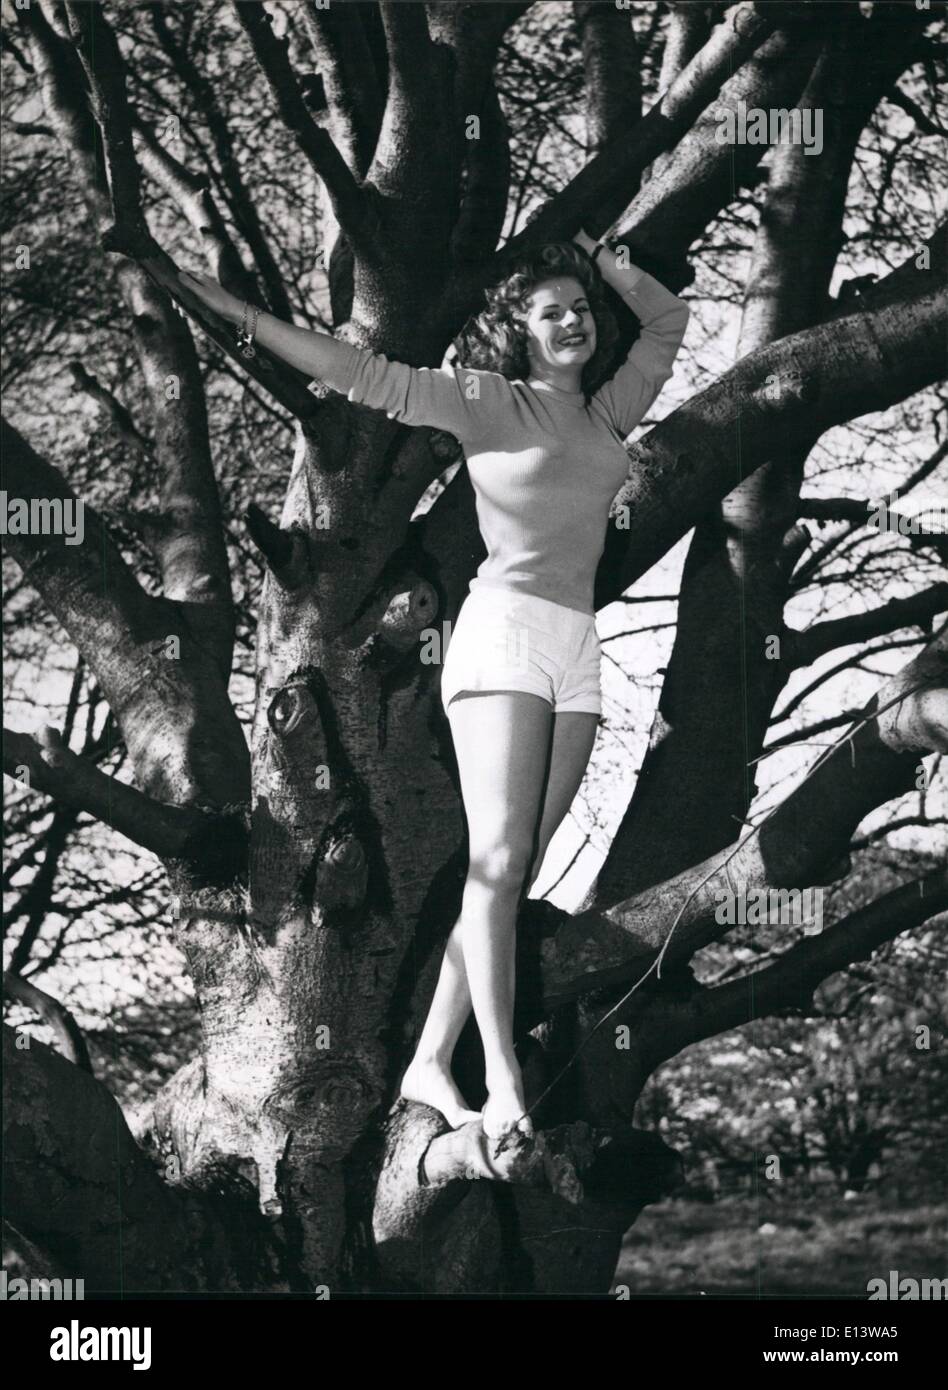 Mar. 27, 2012 - We bow to this girl of the Boughs: Two kinds of limbs here. The shapely limbs of tree lover Marilyn Davis, and the limbs of the tall trees in which she loves to disport herself. Marilyn's as at home in the woods as before the television cameras - but she prefers the open-air life of the former. Stock Photo